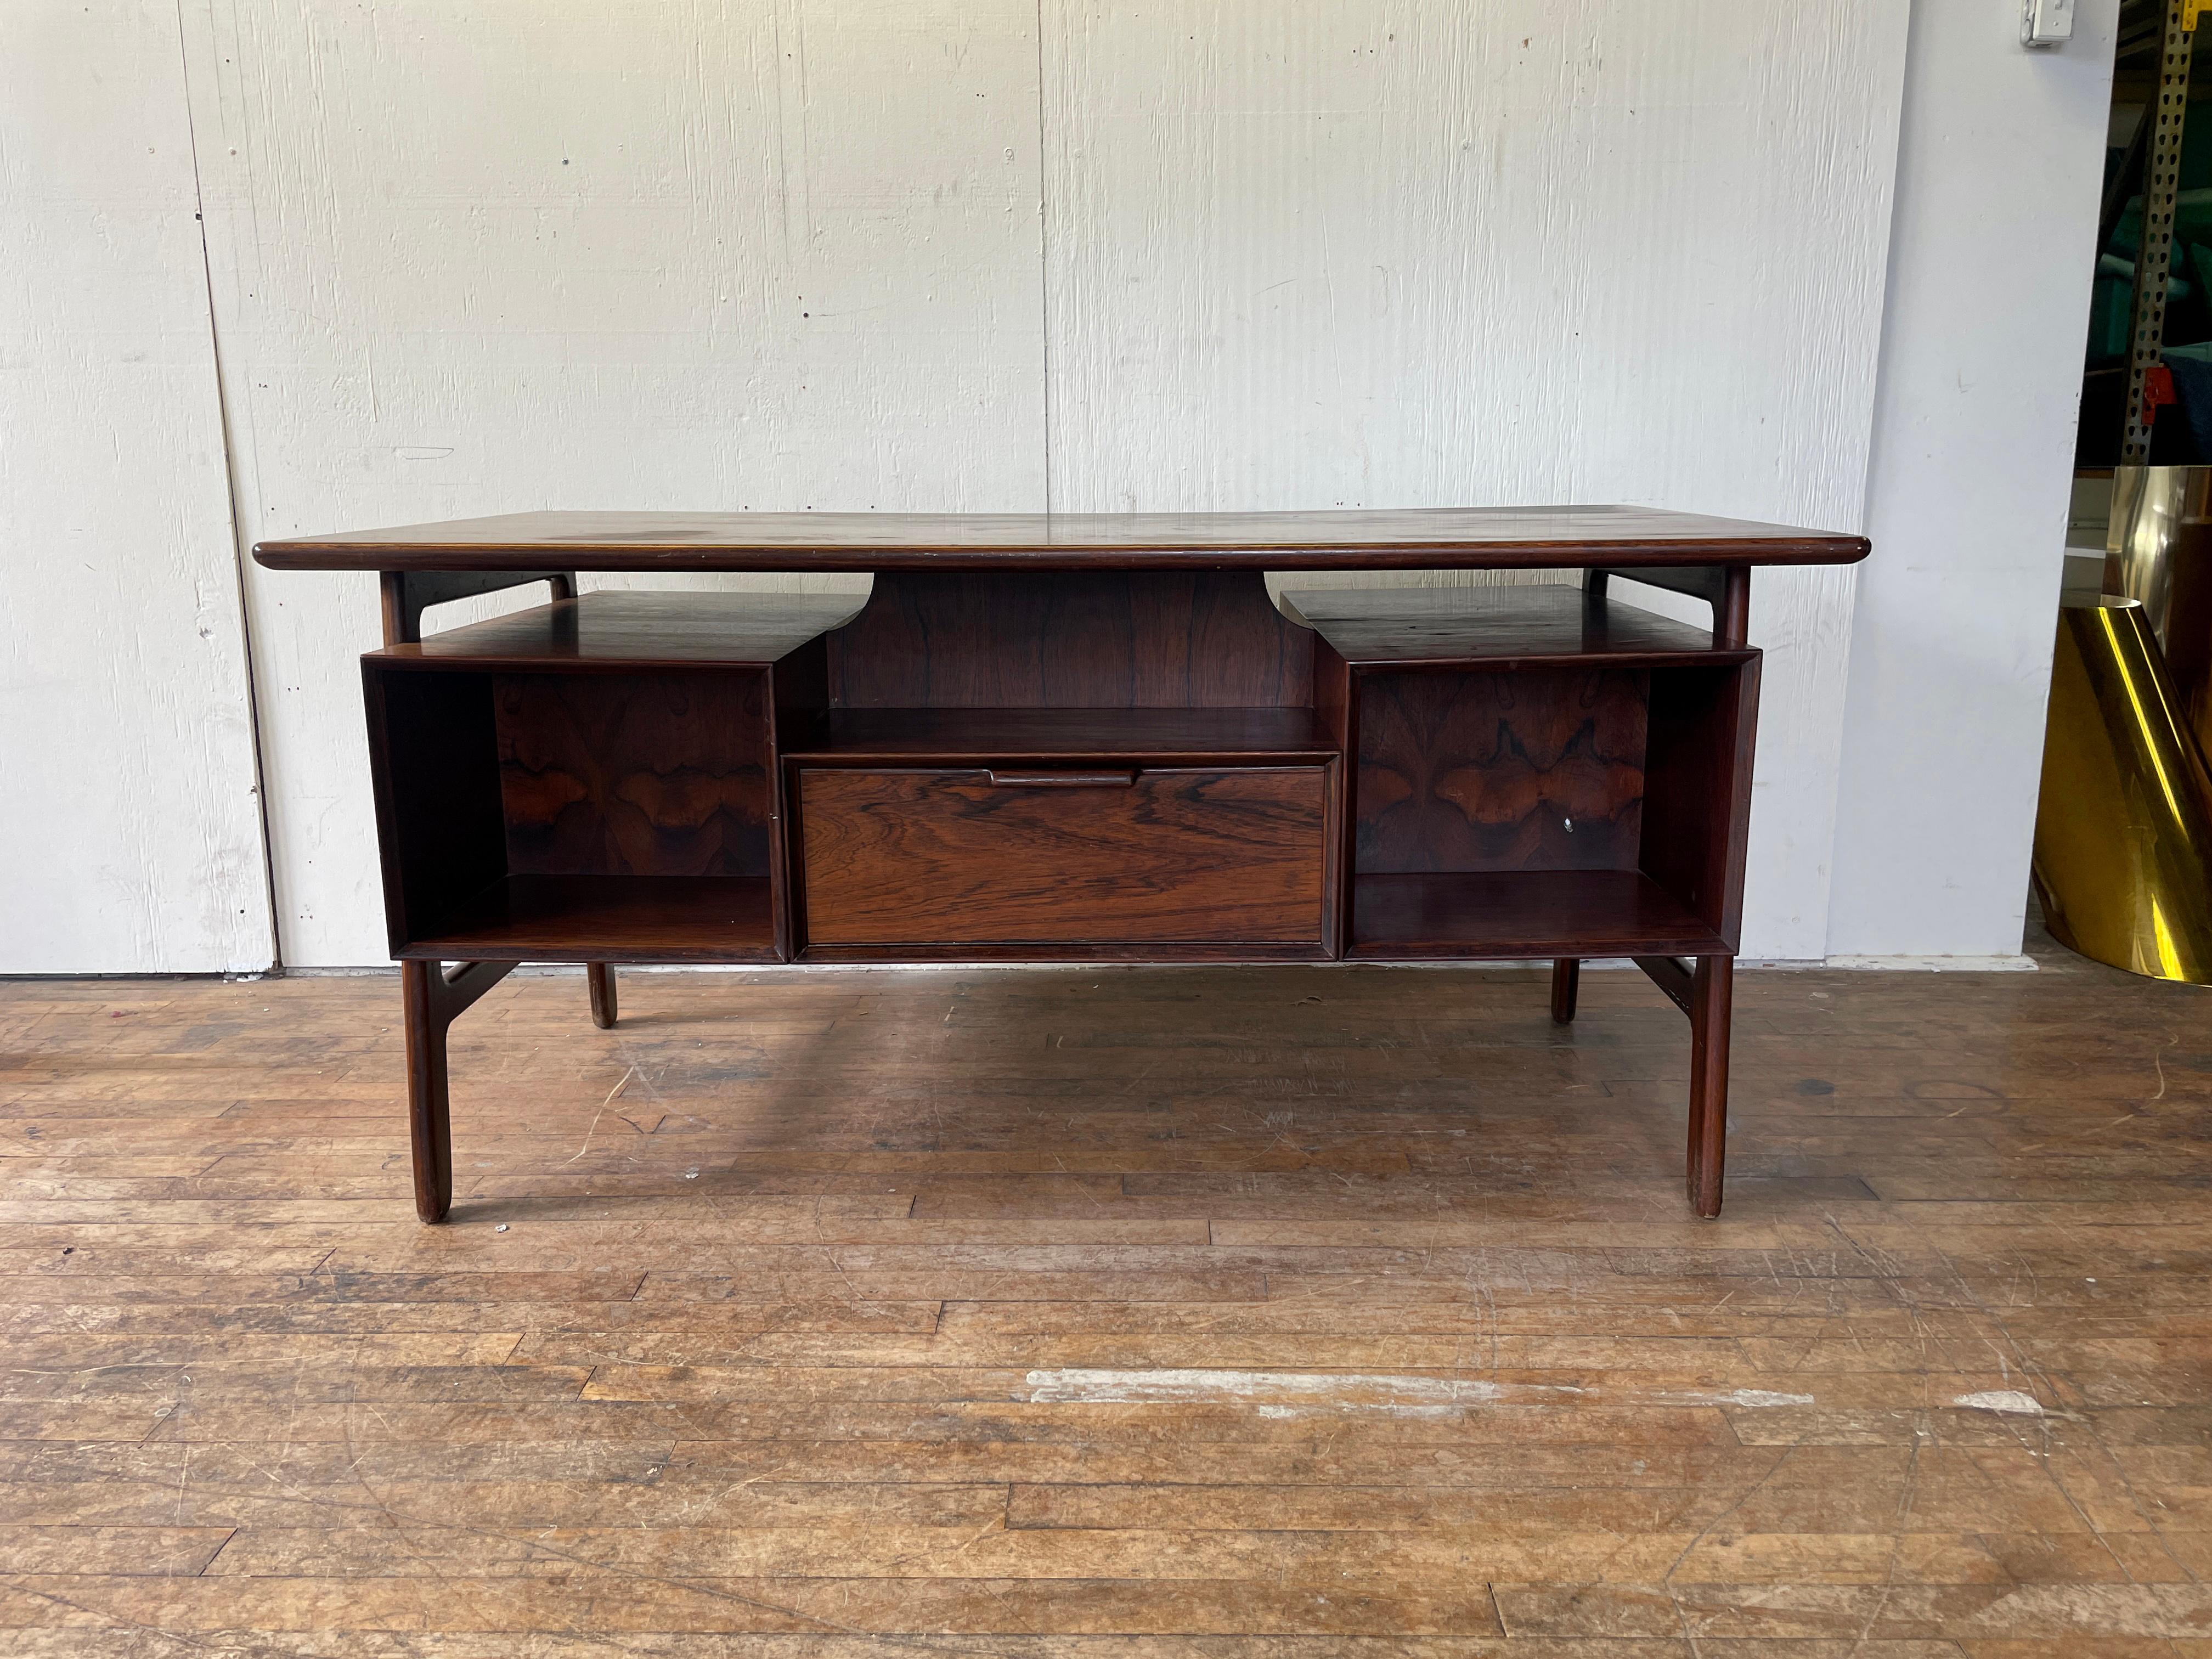 A rare danish-modern rosewood executive desk by Omann Jun. With six drawers, one rear cabinet, and two bookcase alcoves, this desk is packed with storage. The floating design also allows for convenient placement of folders, notebooks, or a laptop on